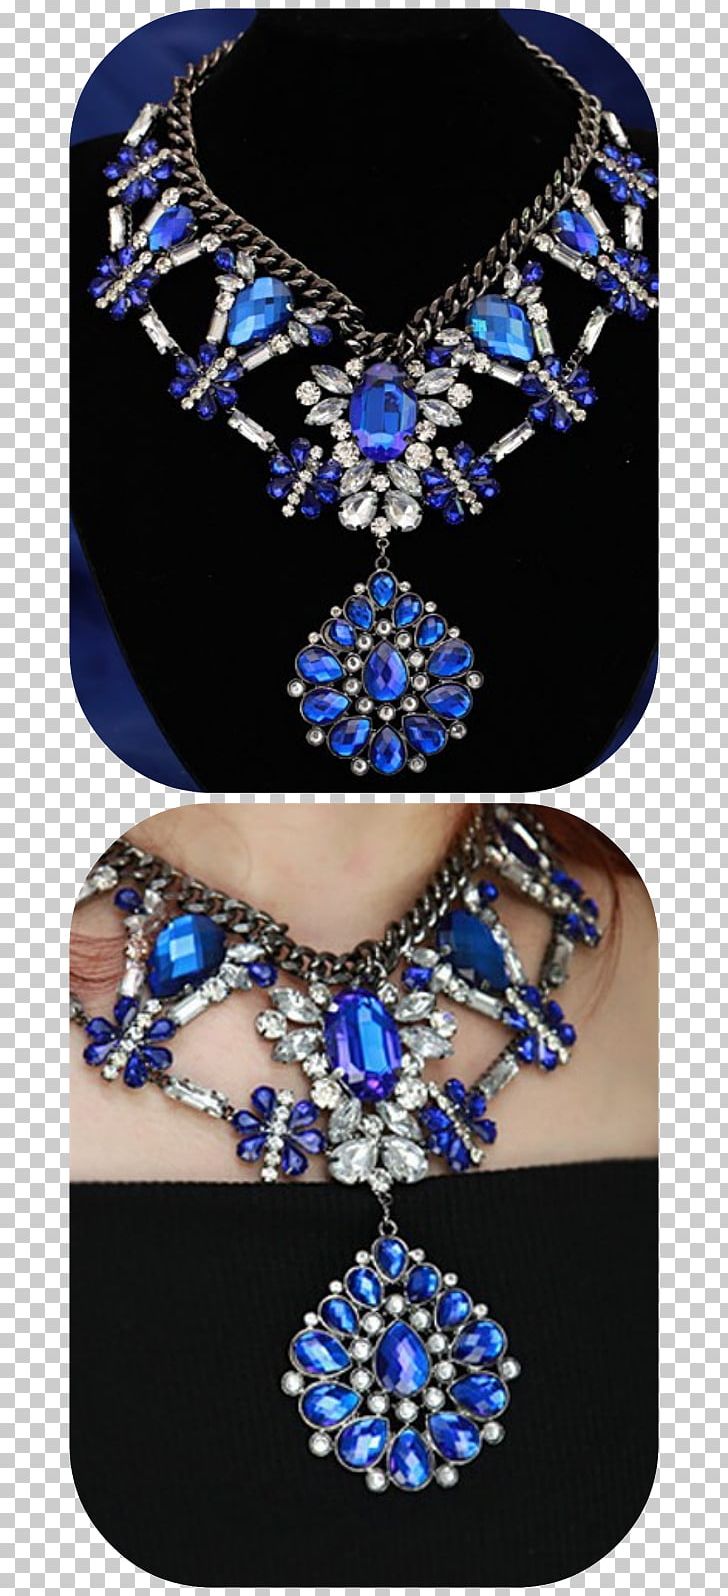 Necklace Bling-bling Jewellery Fashion Chain PNG, Clipart, Blingbling, Bling Bling, Blue, Chain, Cobalt Blue Free PNG Download